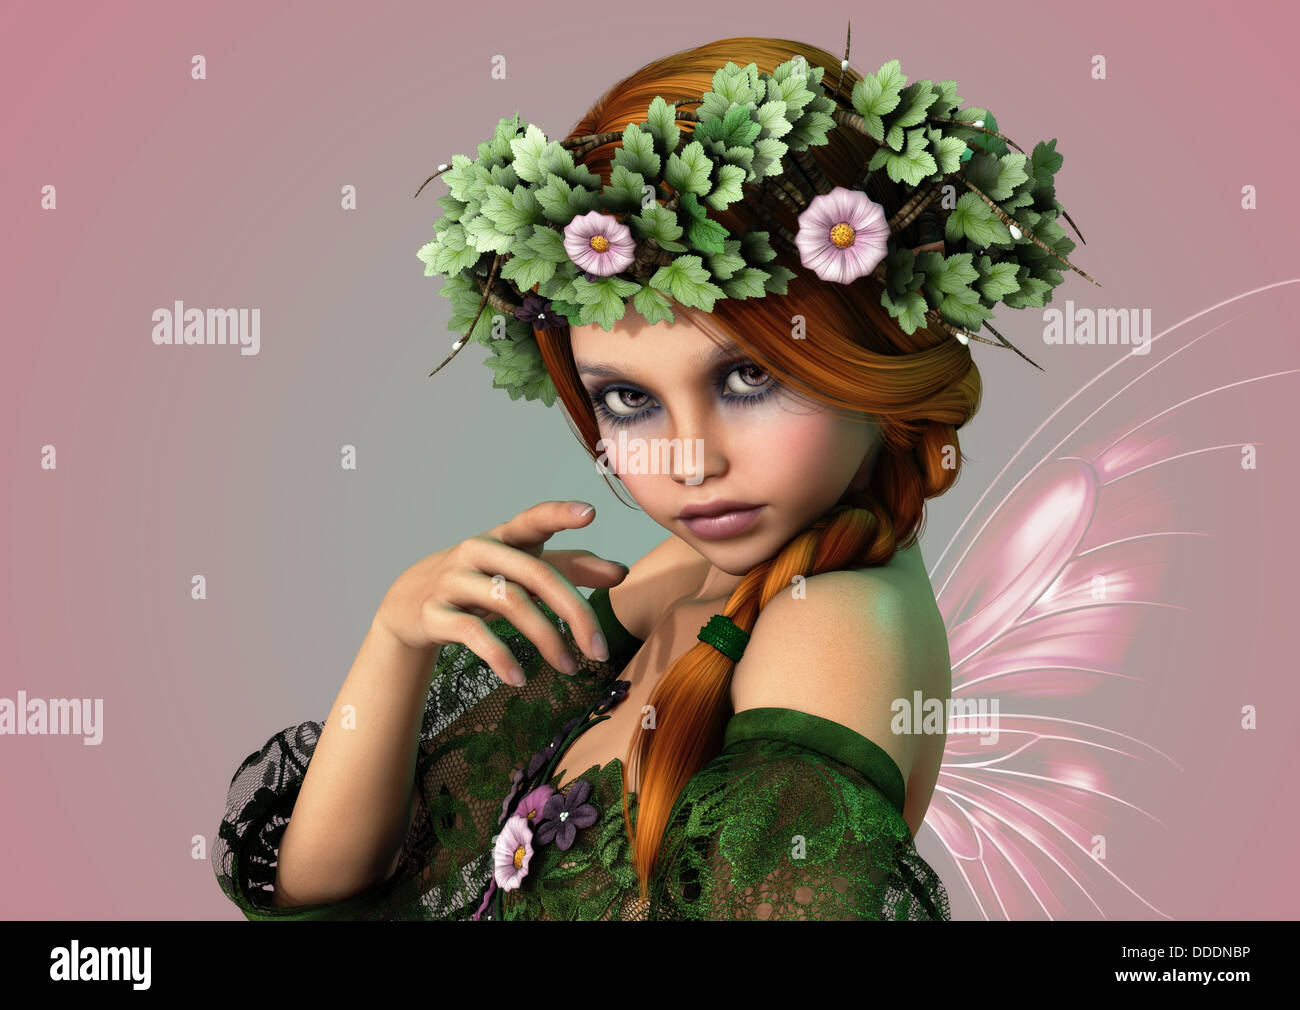 3D computer graphics of a girl with a wreath of flowers in her hair Stock Photo